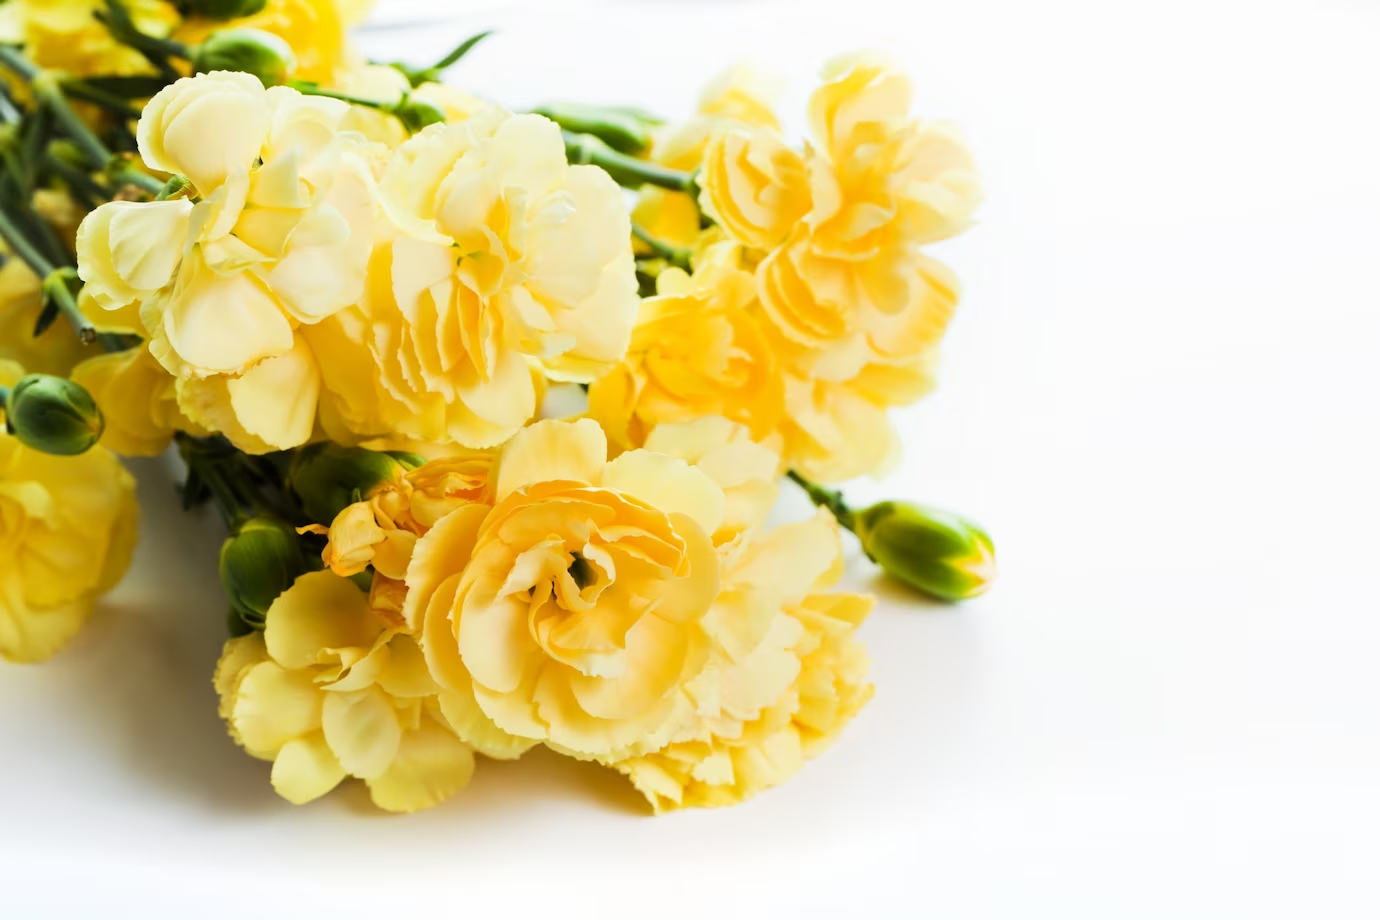 What Are The Meanings Of These 10 Yellow Flowers?